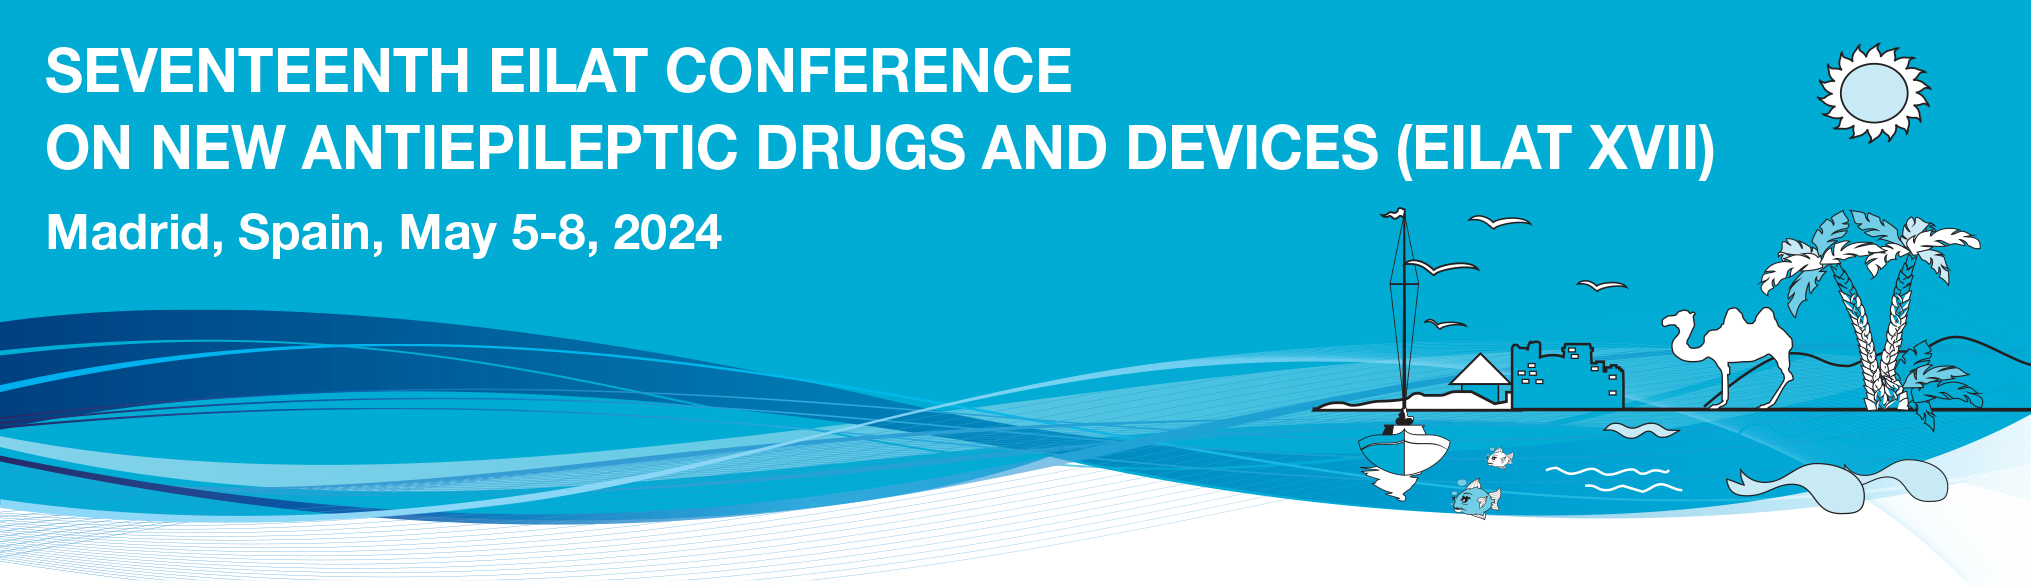 Seventeenth Eilat Conference on New Antiepileptic Drugs and Devices (EILAT XVII)